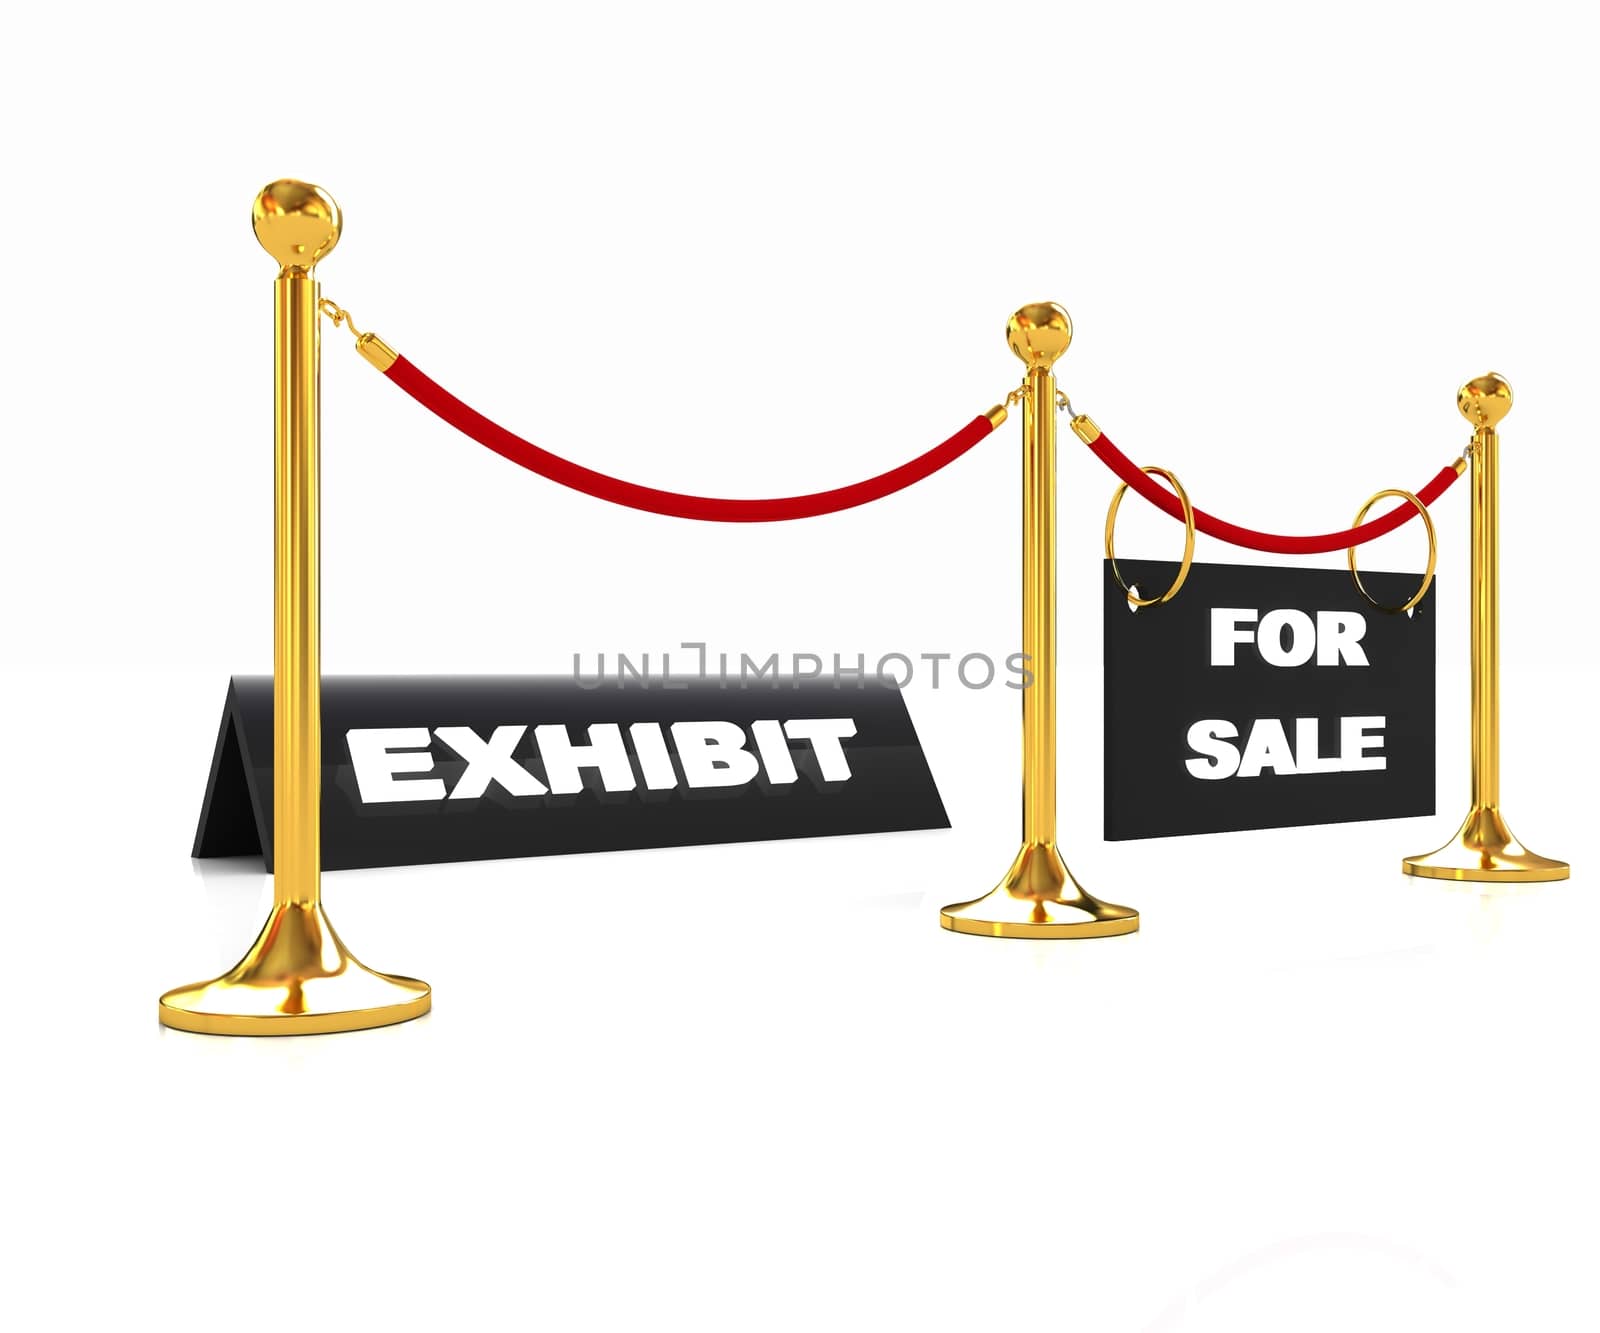 Exhibition on a white background